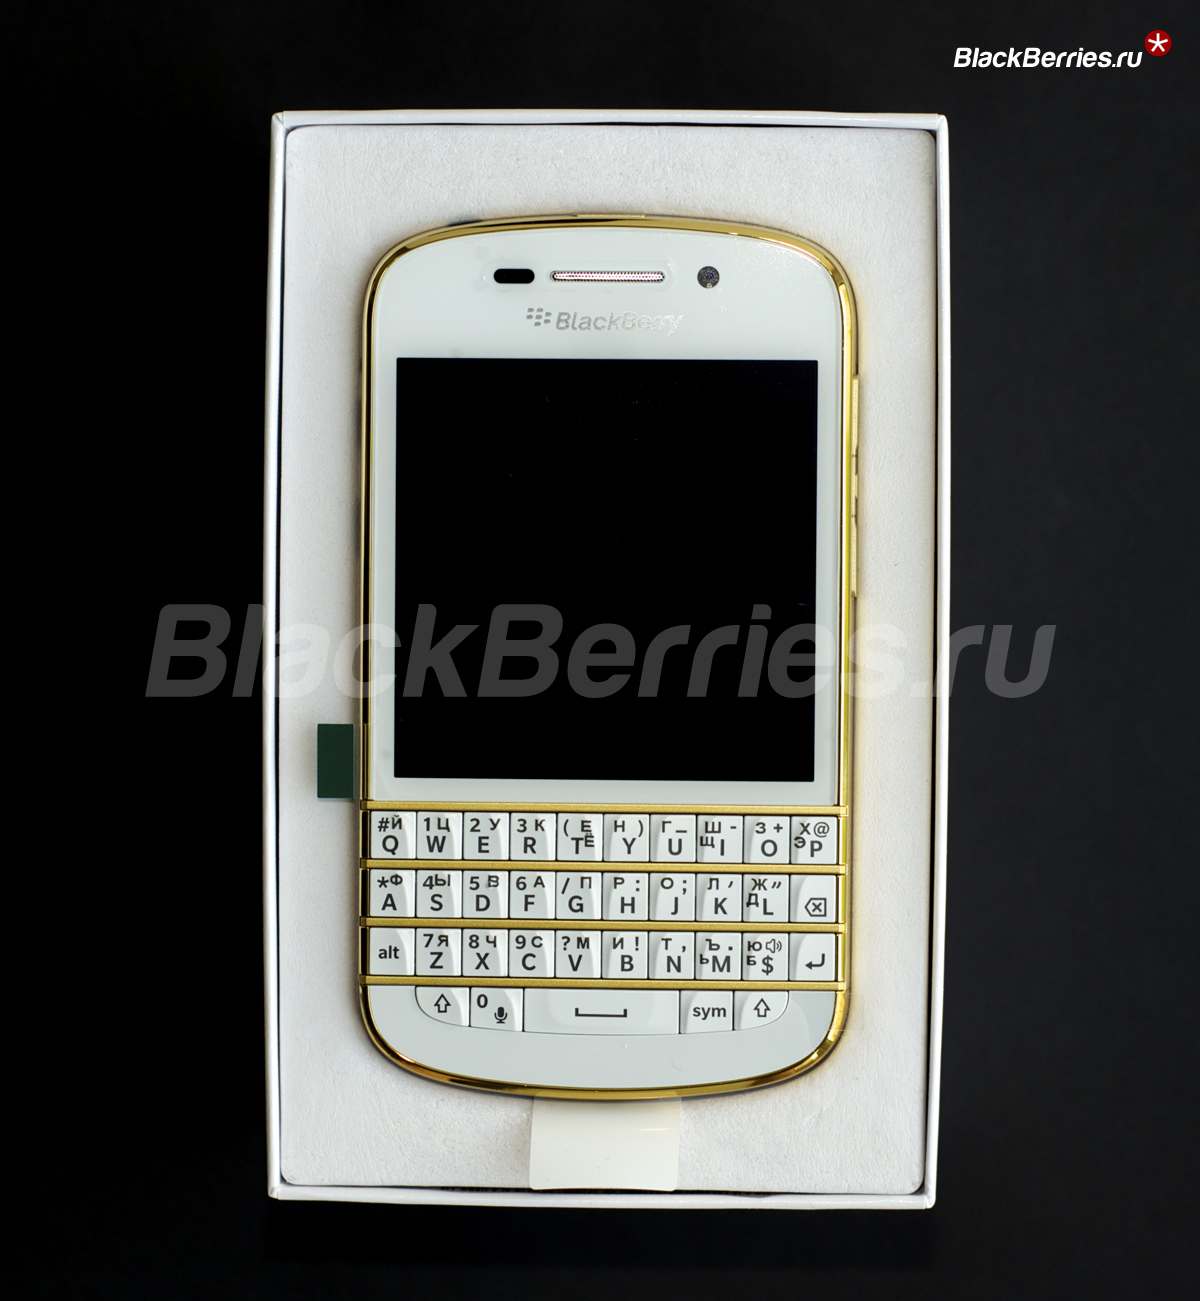 BlackBerry-Q10-Special-Edition-89